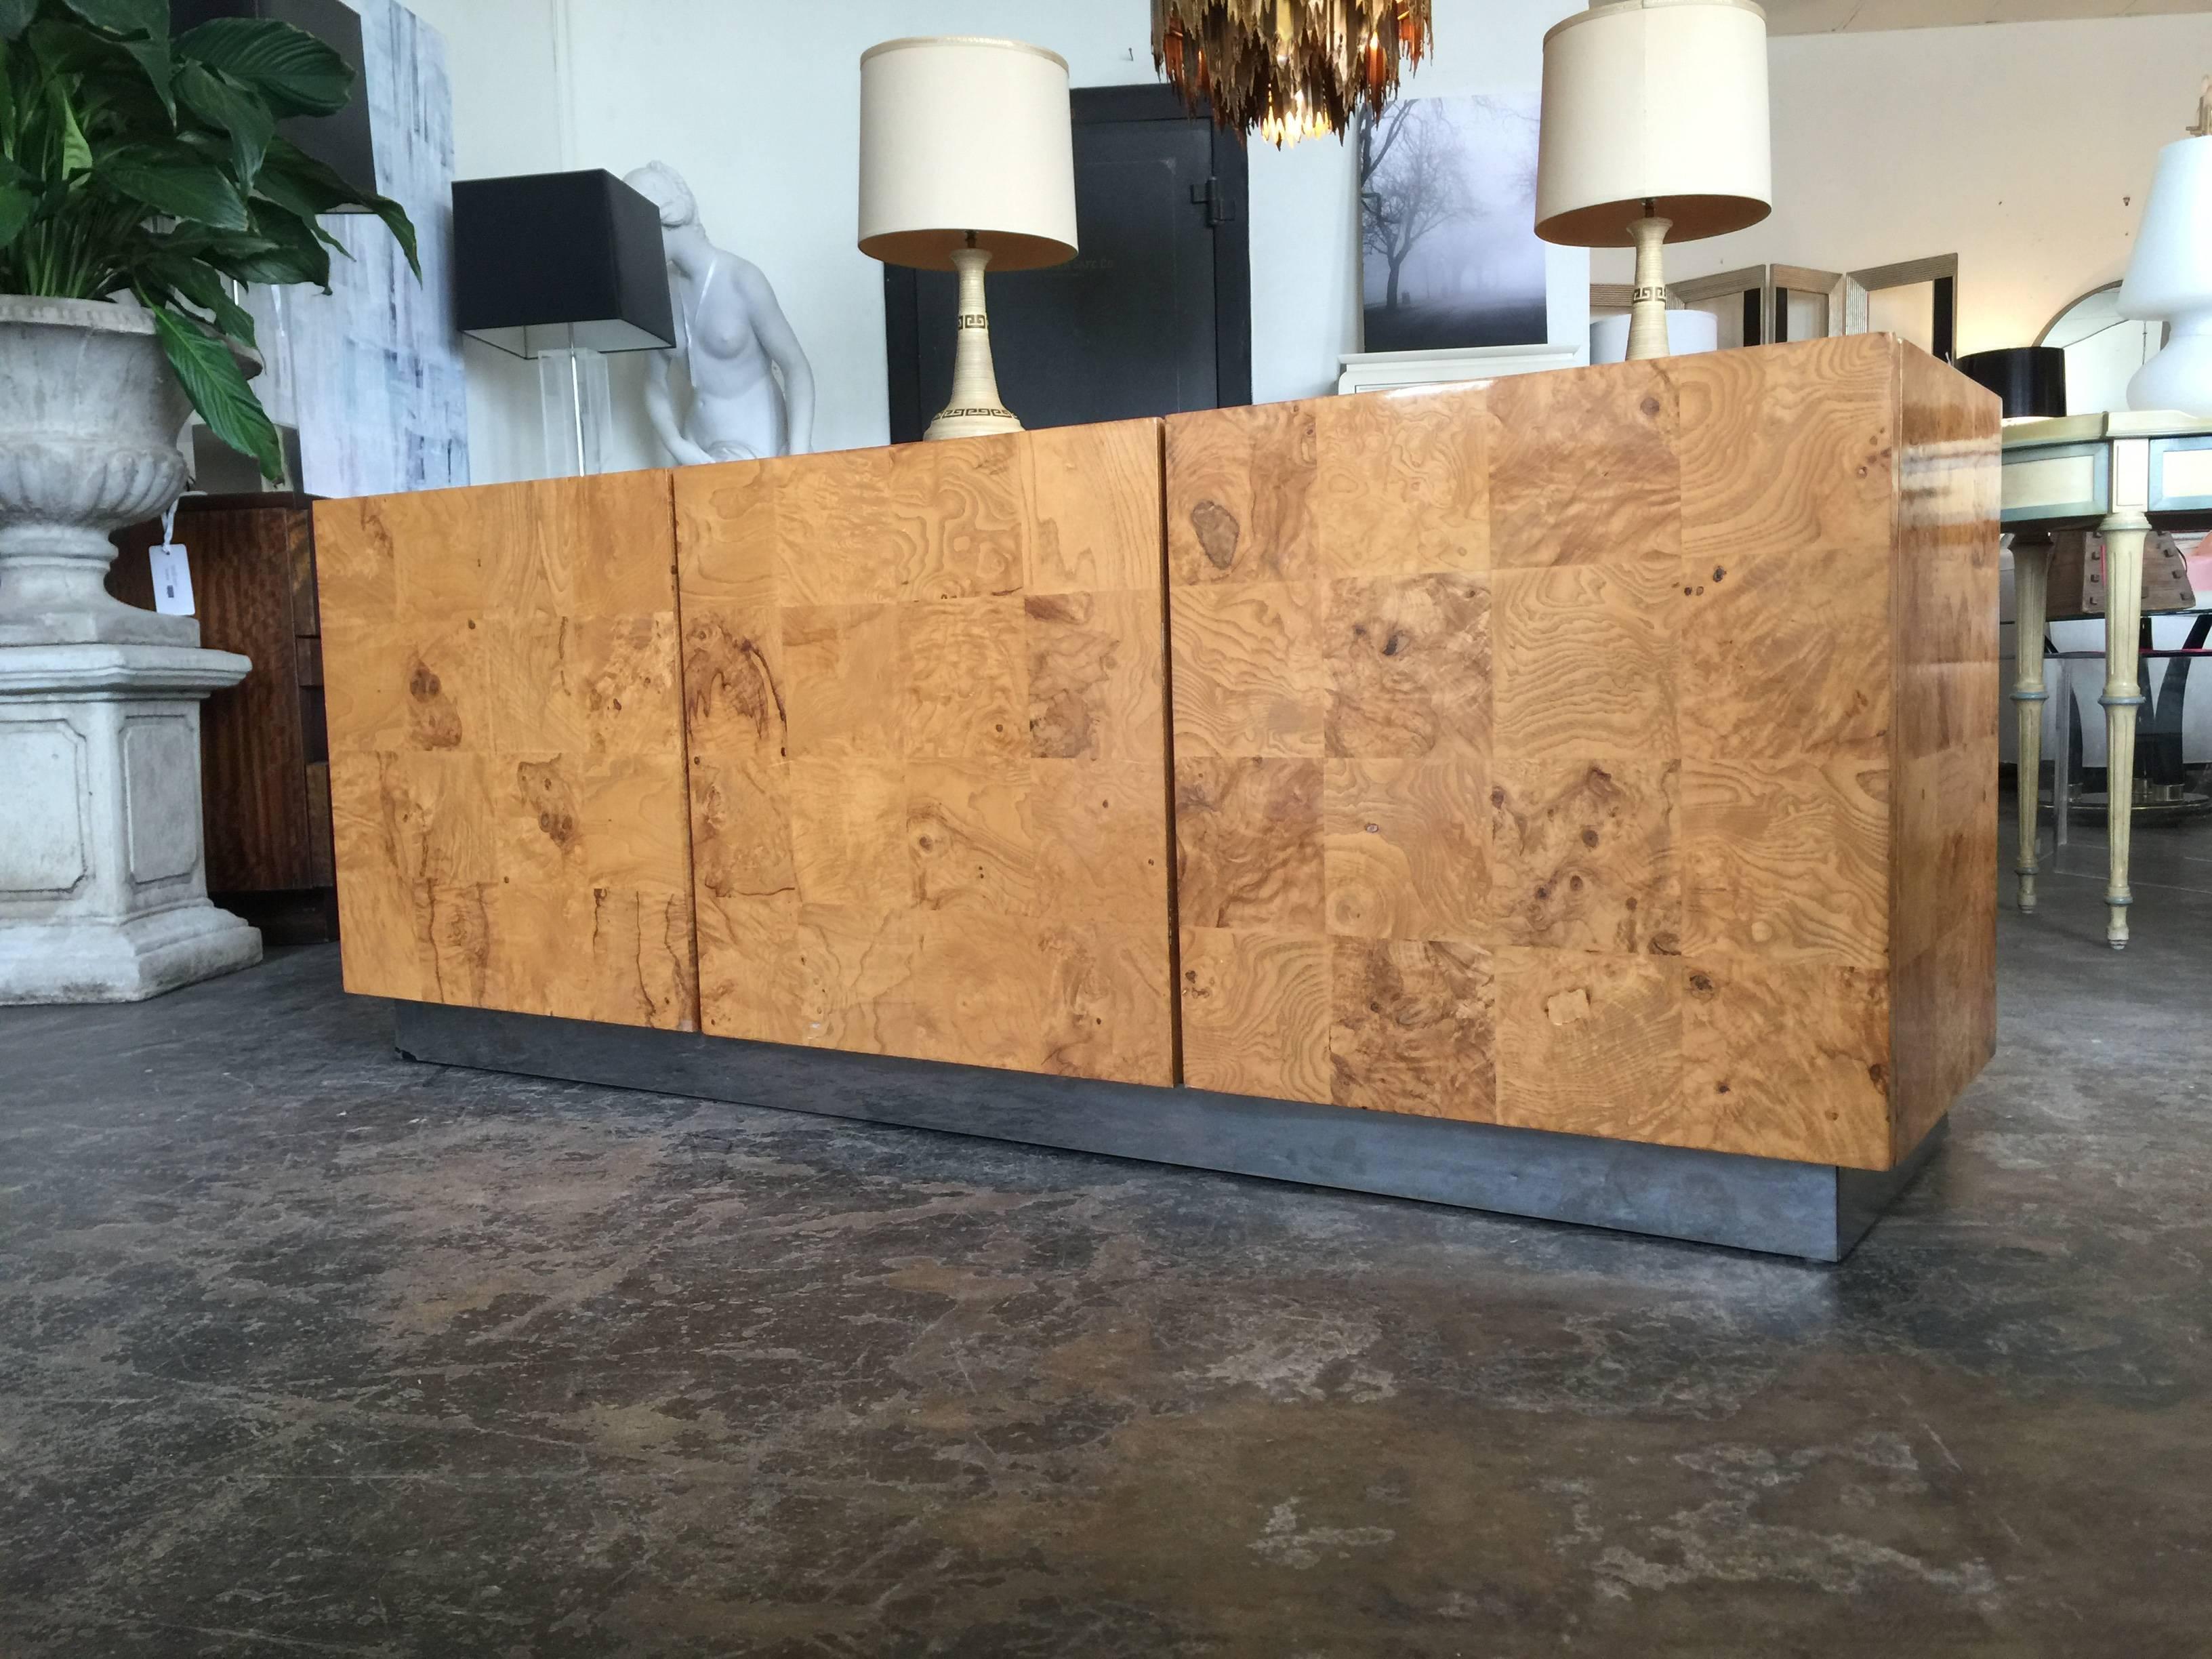 Milo Baughman burl wood credenza. She is a shorty however, yet perfect to anchor your big screen TV.

Dimensions: 66